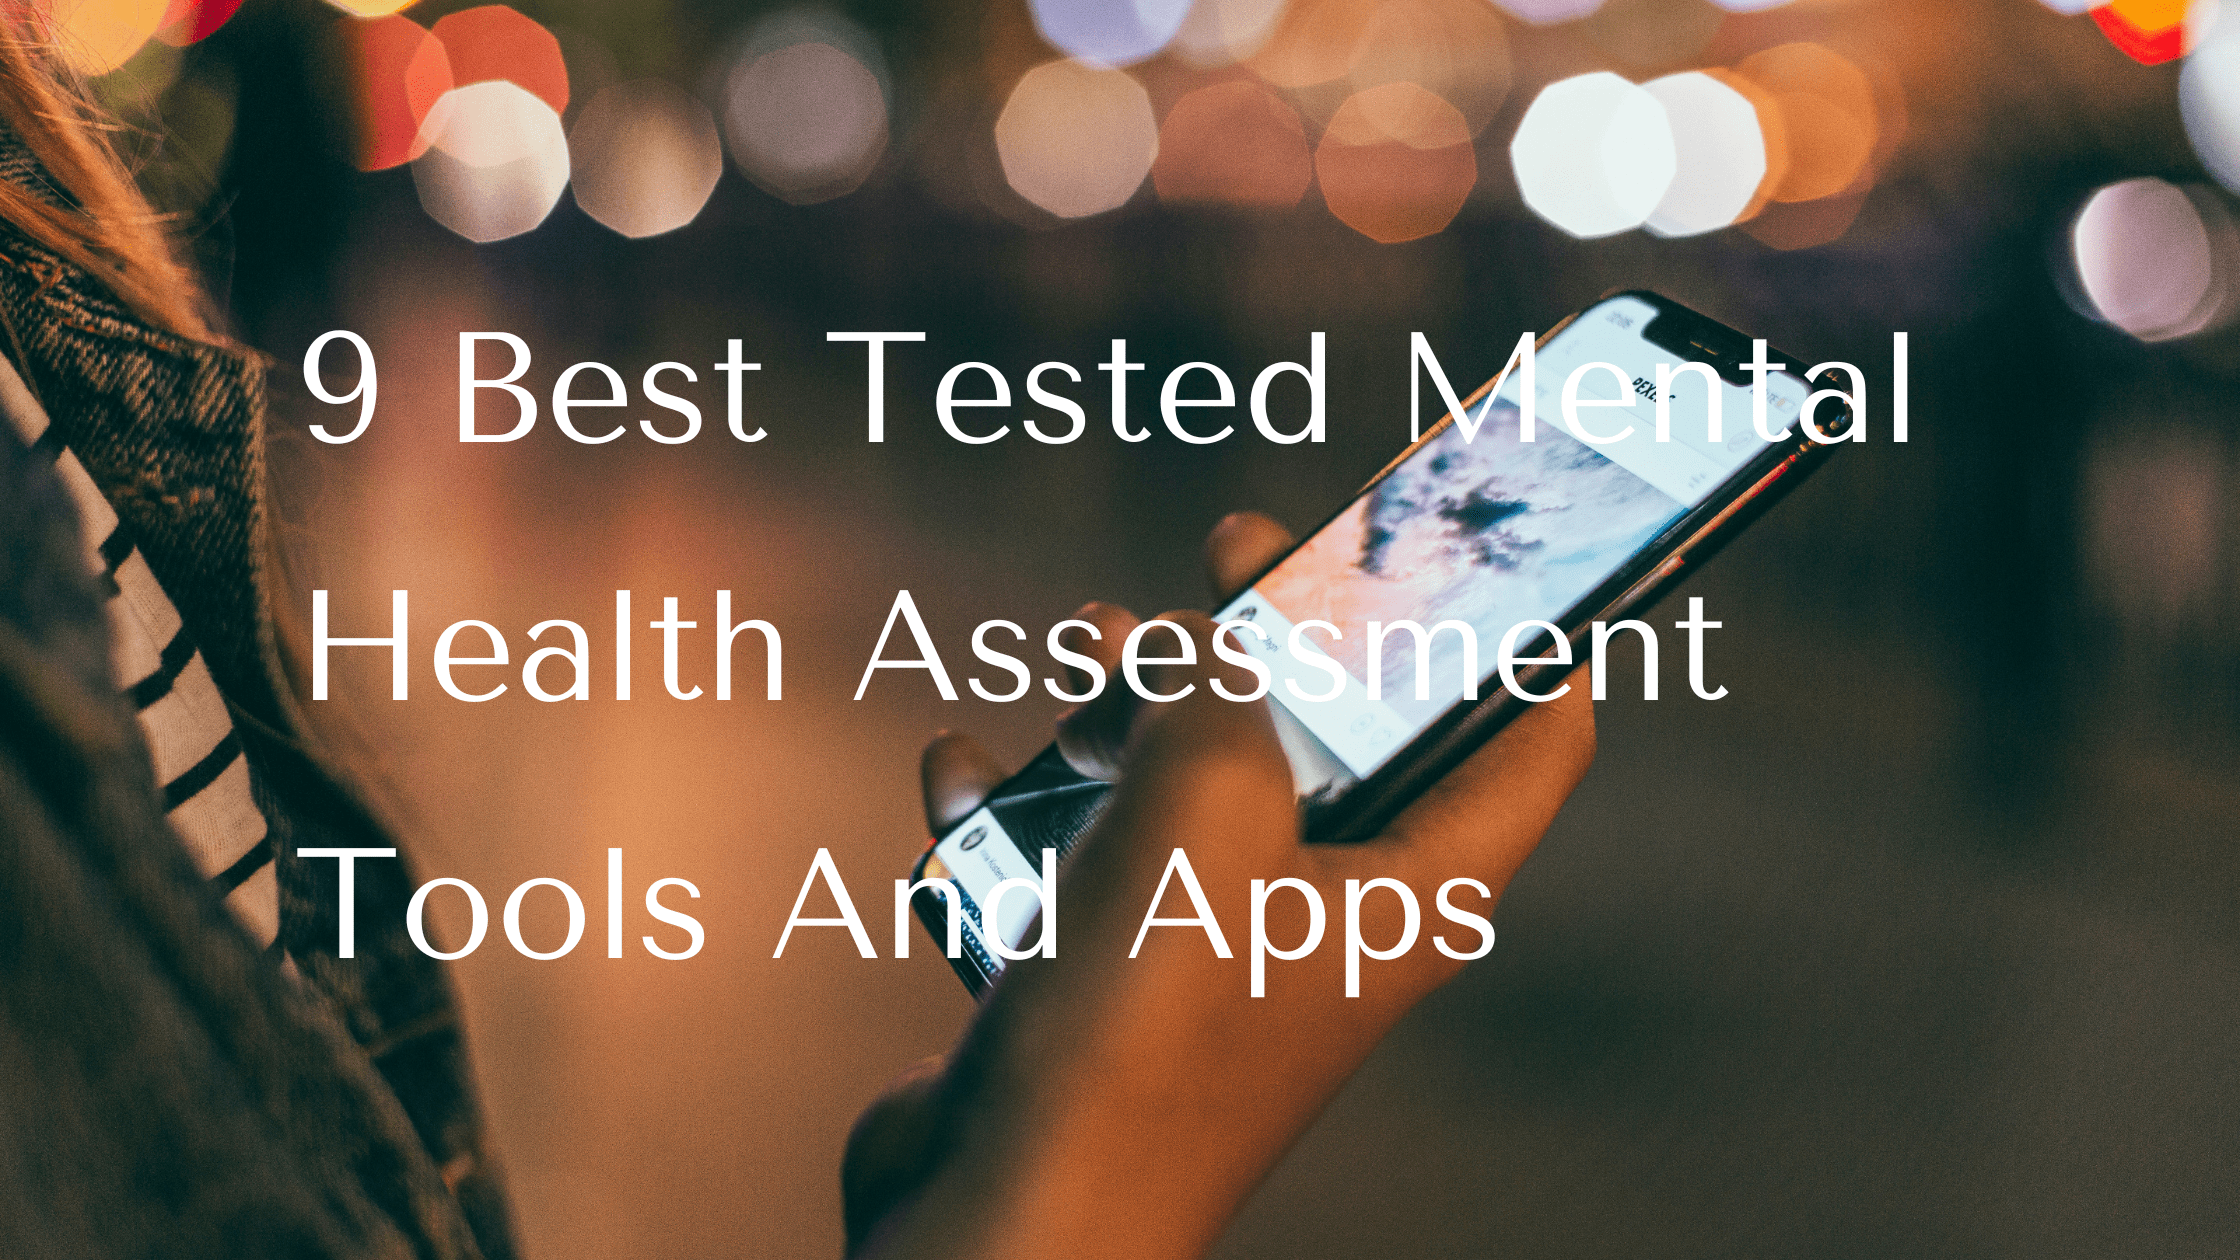 Mental Health Assessment Tools And Apps